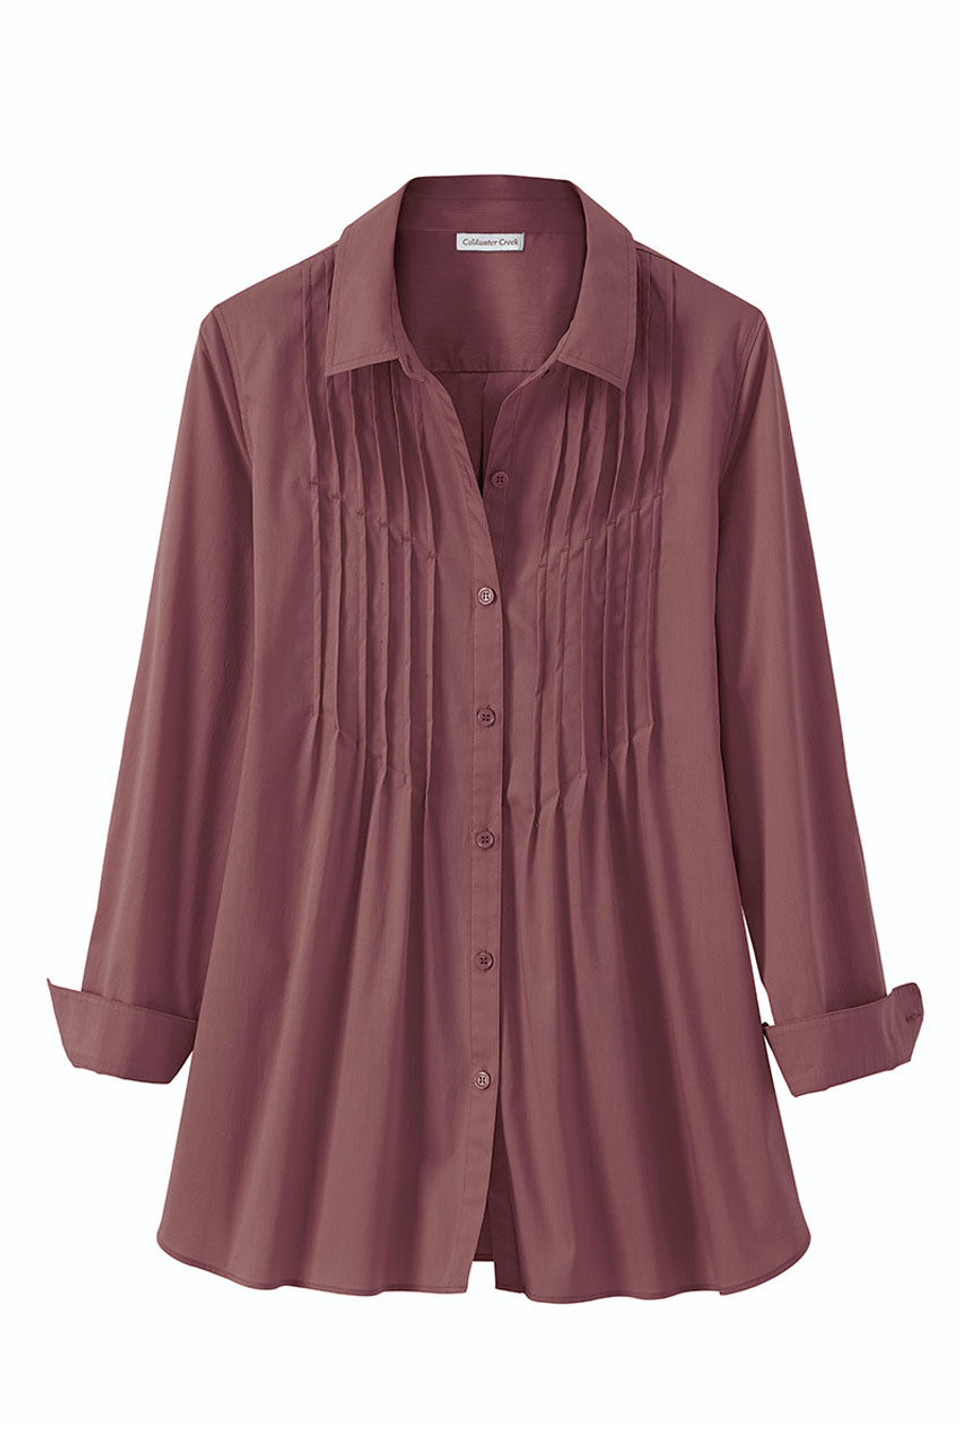 Easy Care Pintuck Shirt - Coldwater Creek